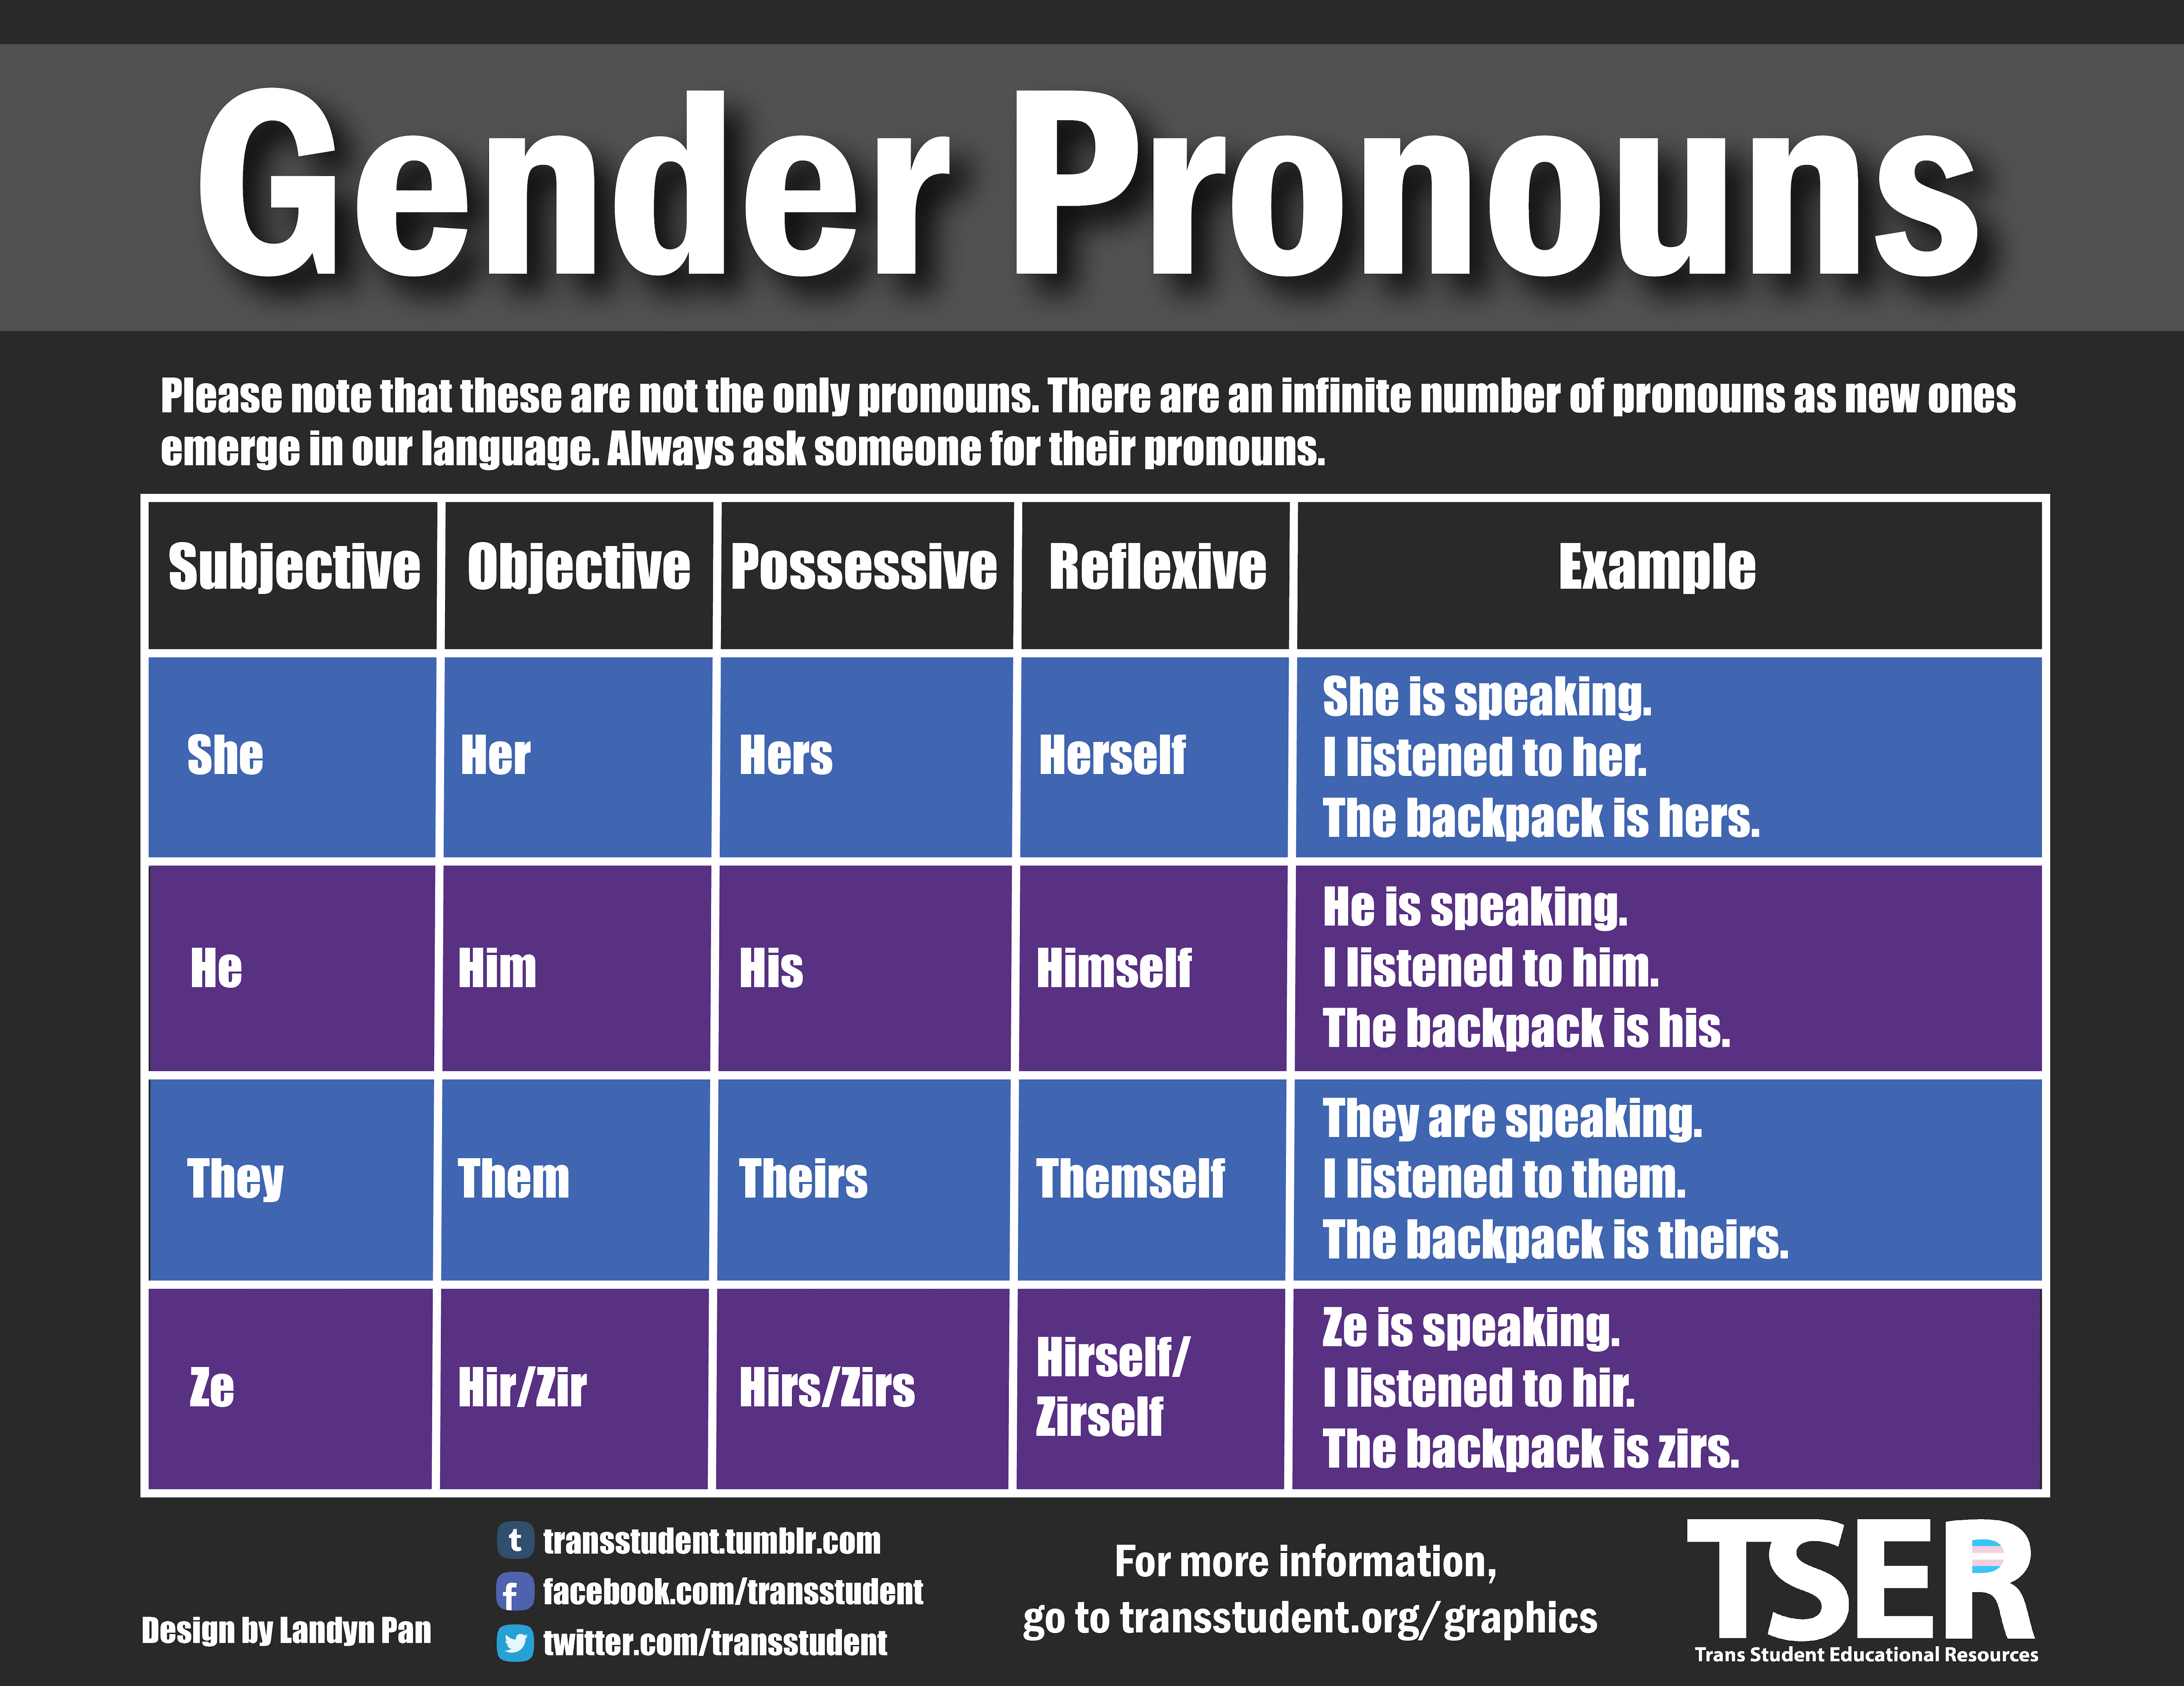 What are the 4 gender pronouns?